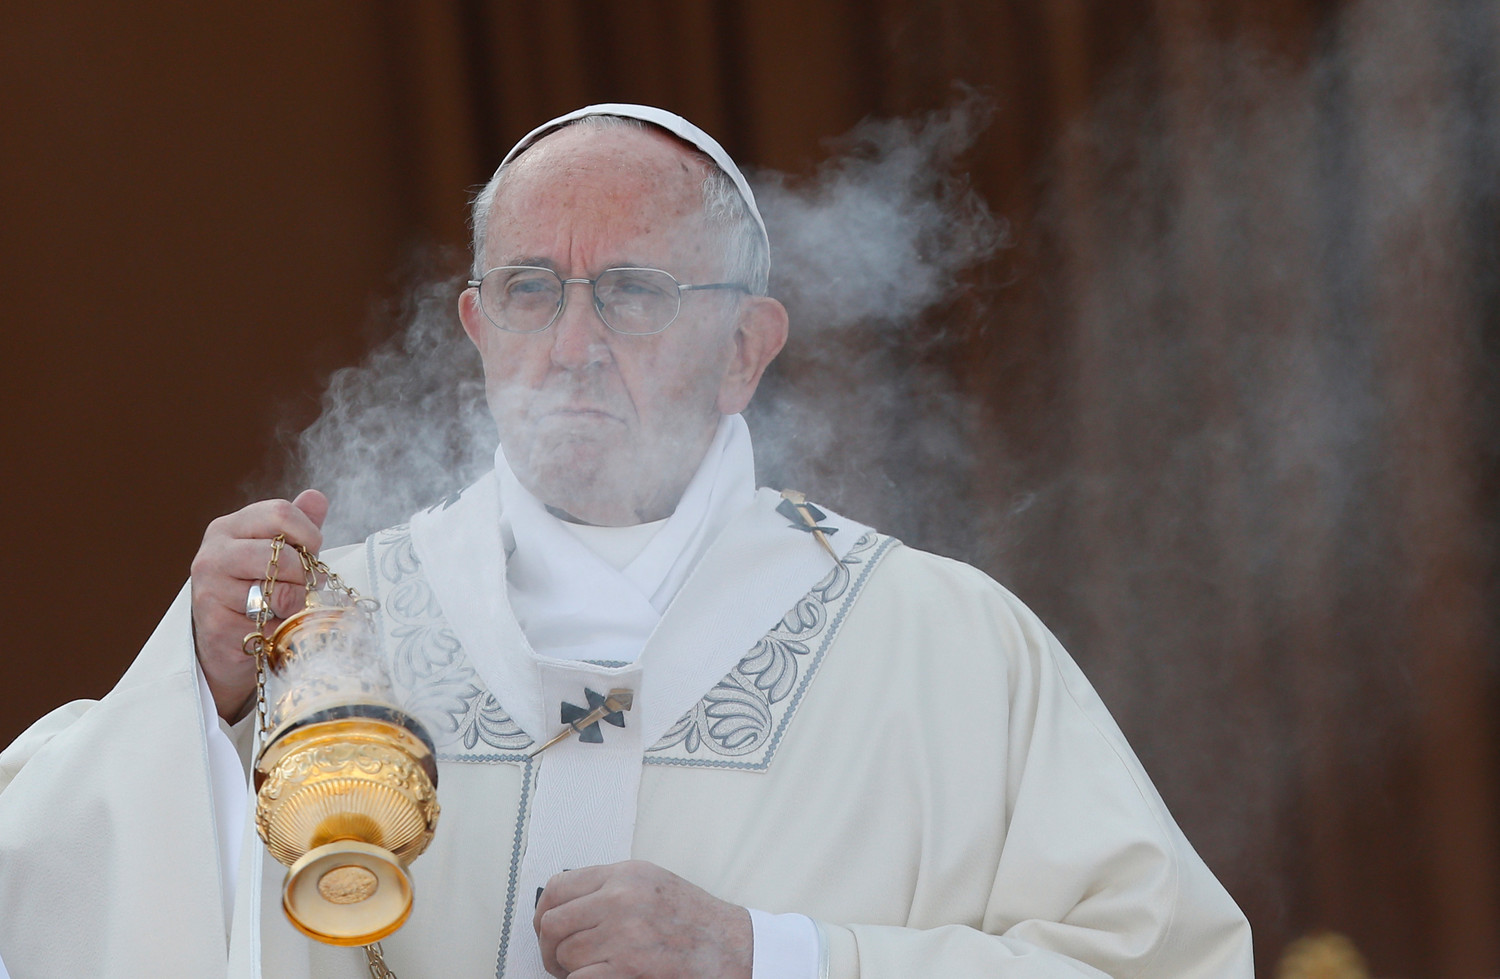 Pope Francis burns incense as he celebrates Mass marking the feast of Corpus Christi in Ostia, a suburb of Rome, June 3.